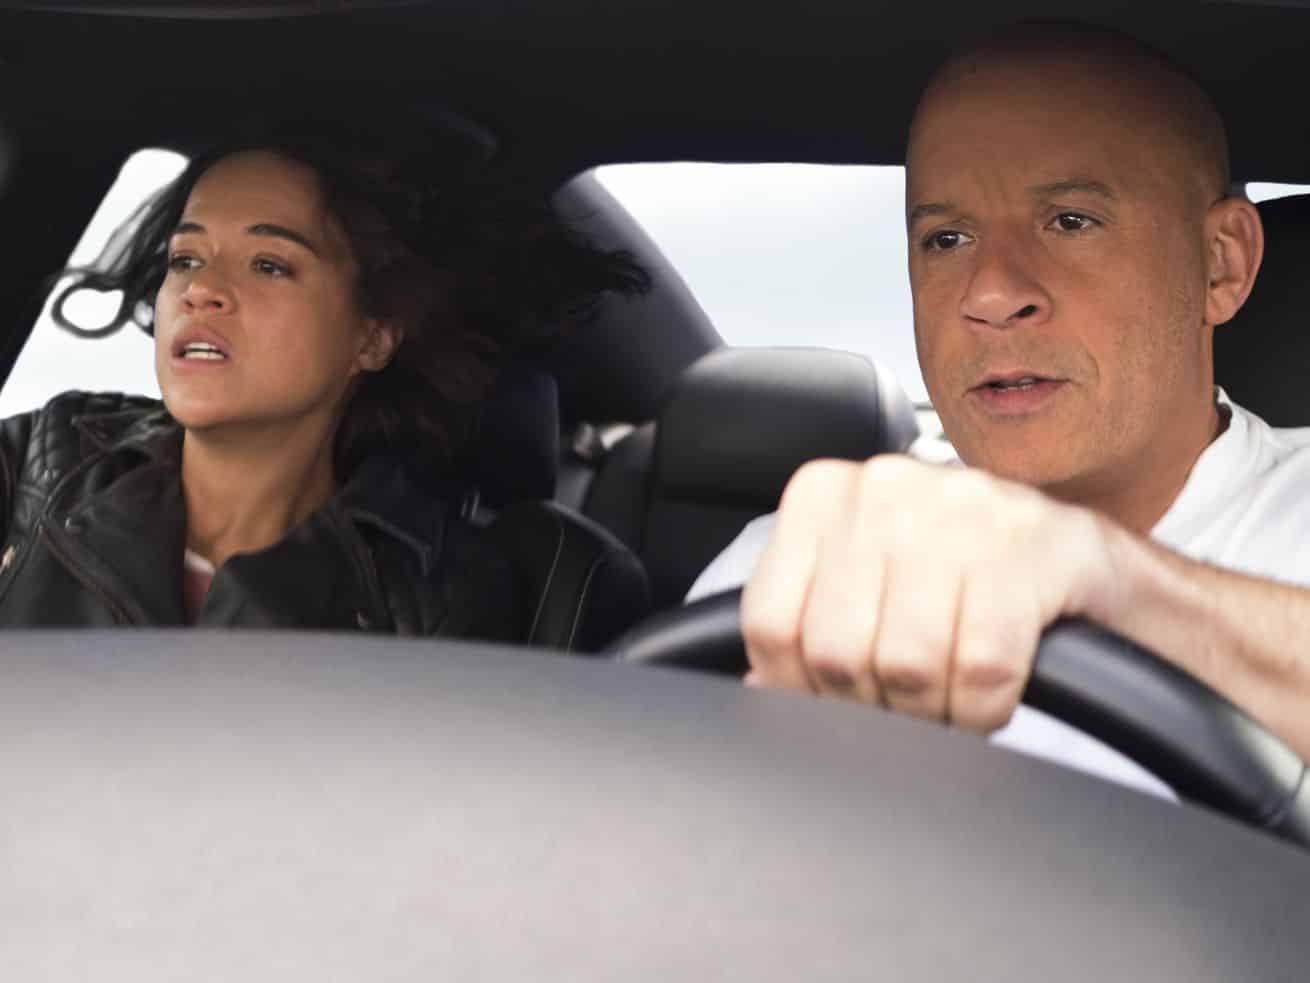 The rise and rise and rise of the Fast & Furious franchise